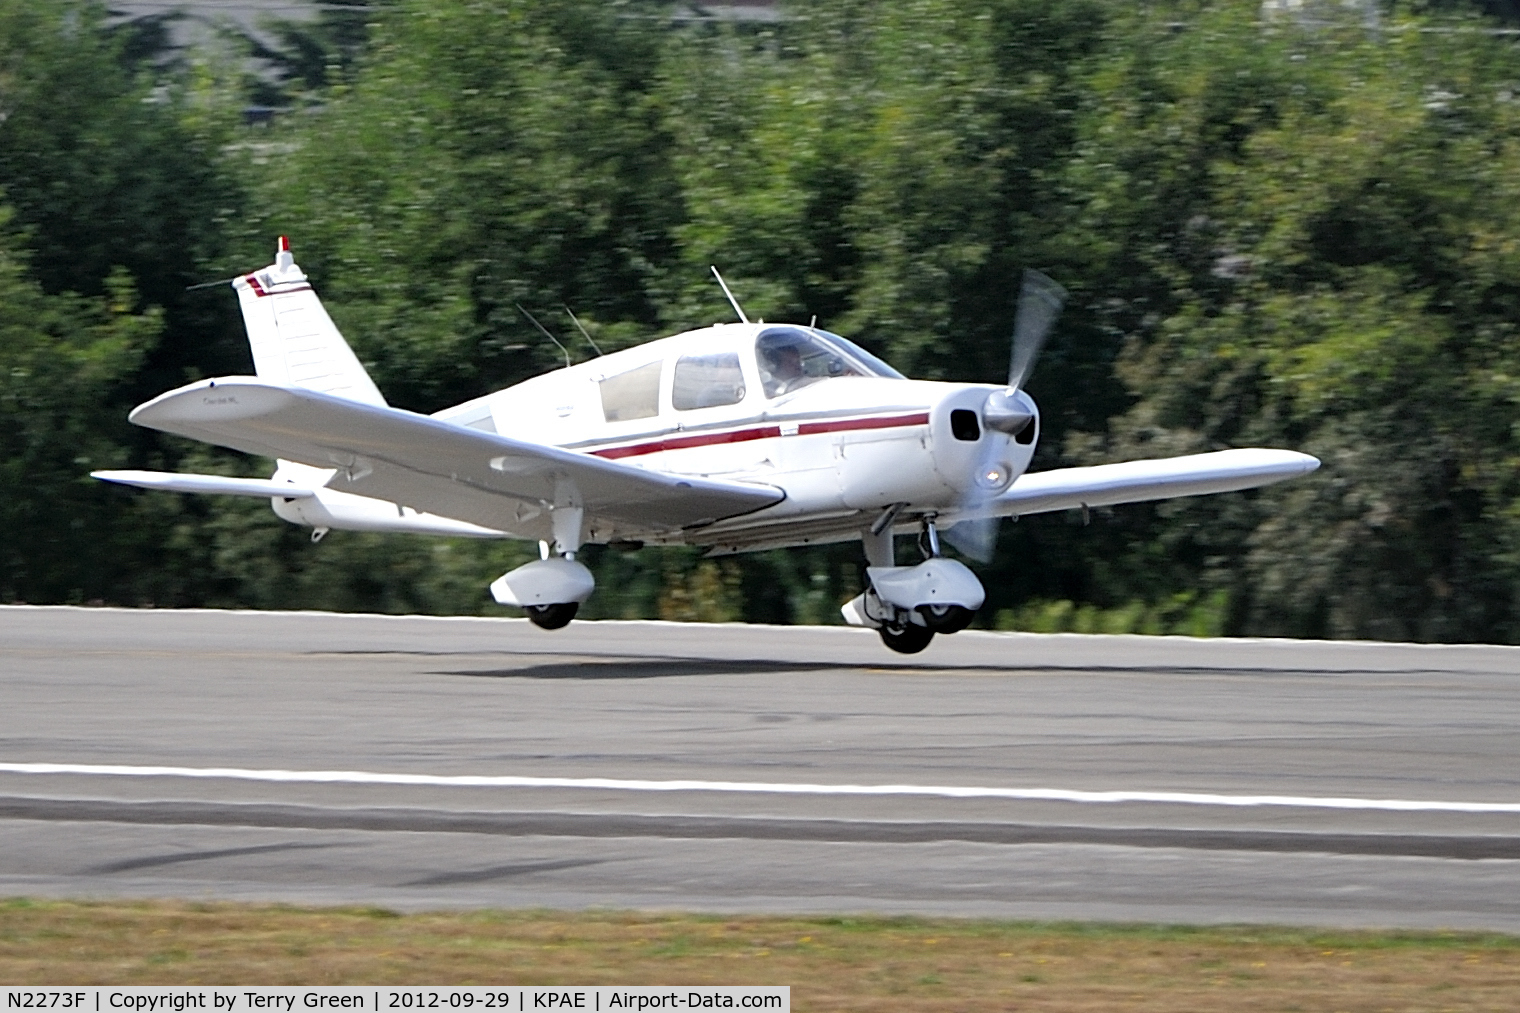 N2273F, 1969 Piper PA-28-140 C/N 28-25431, Snohomish County Airport aka Paine Field